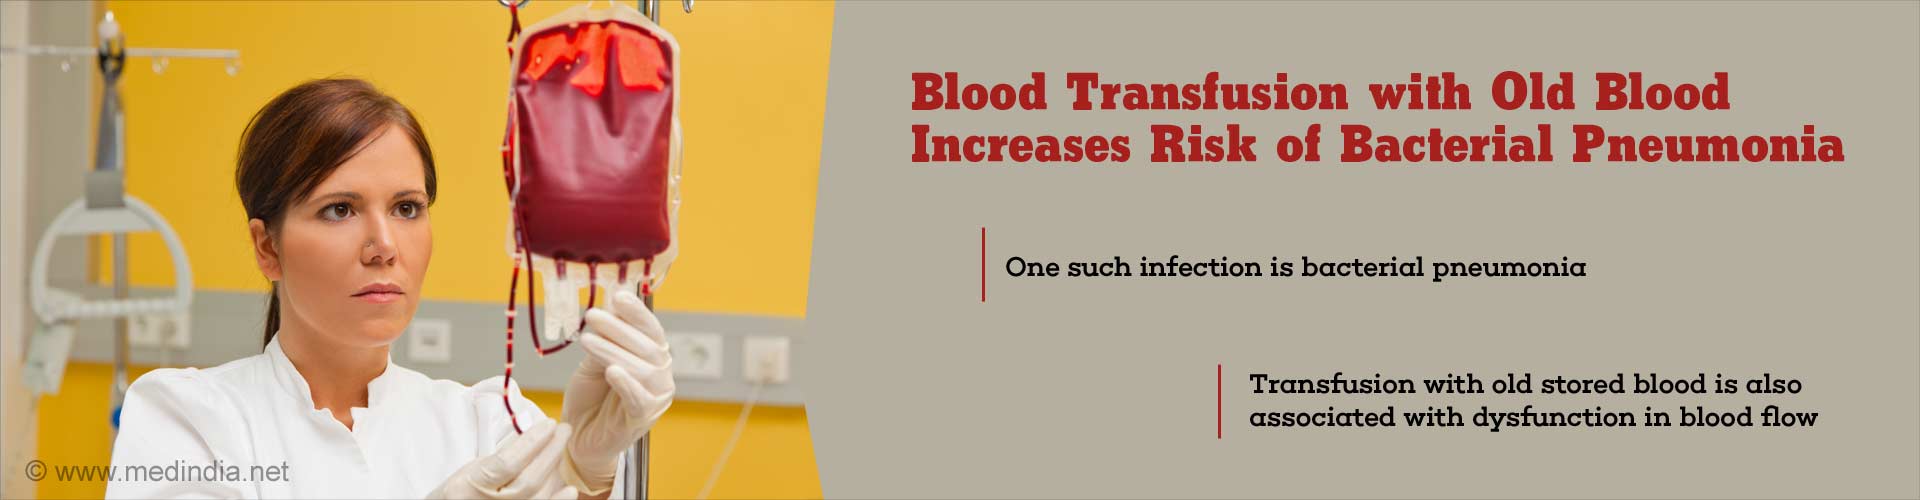 blood transfusion with old blood increases risk of bacterial pneumonia
- one such infection is bacterial pneumonia
- transfusion with old stored blood is also associated with dysfunction in blood flow
